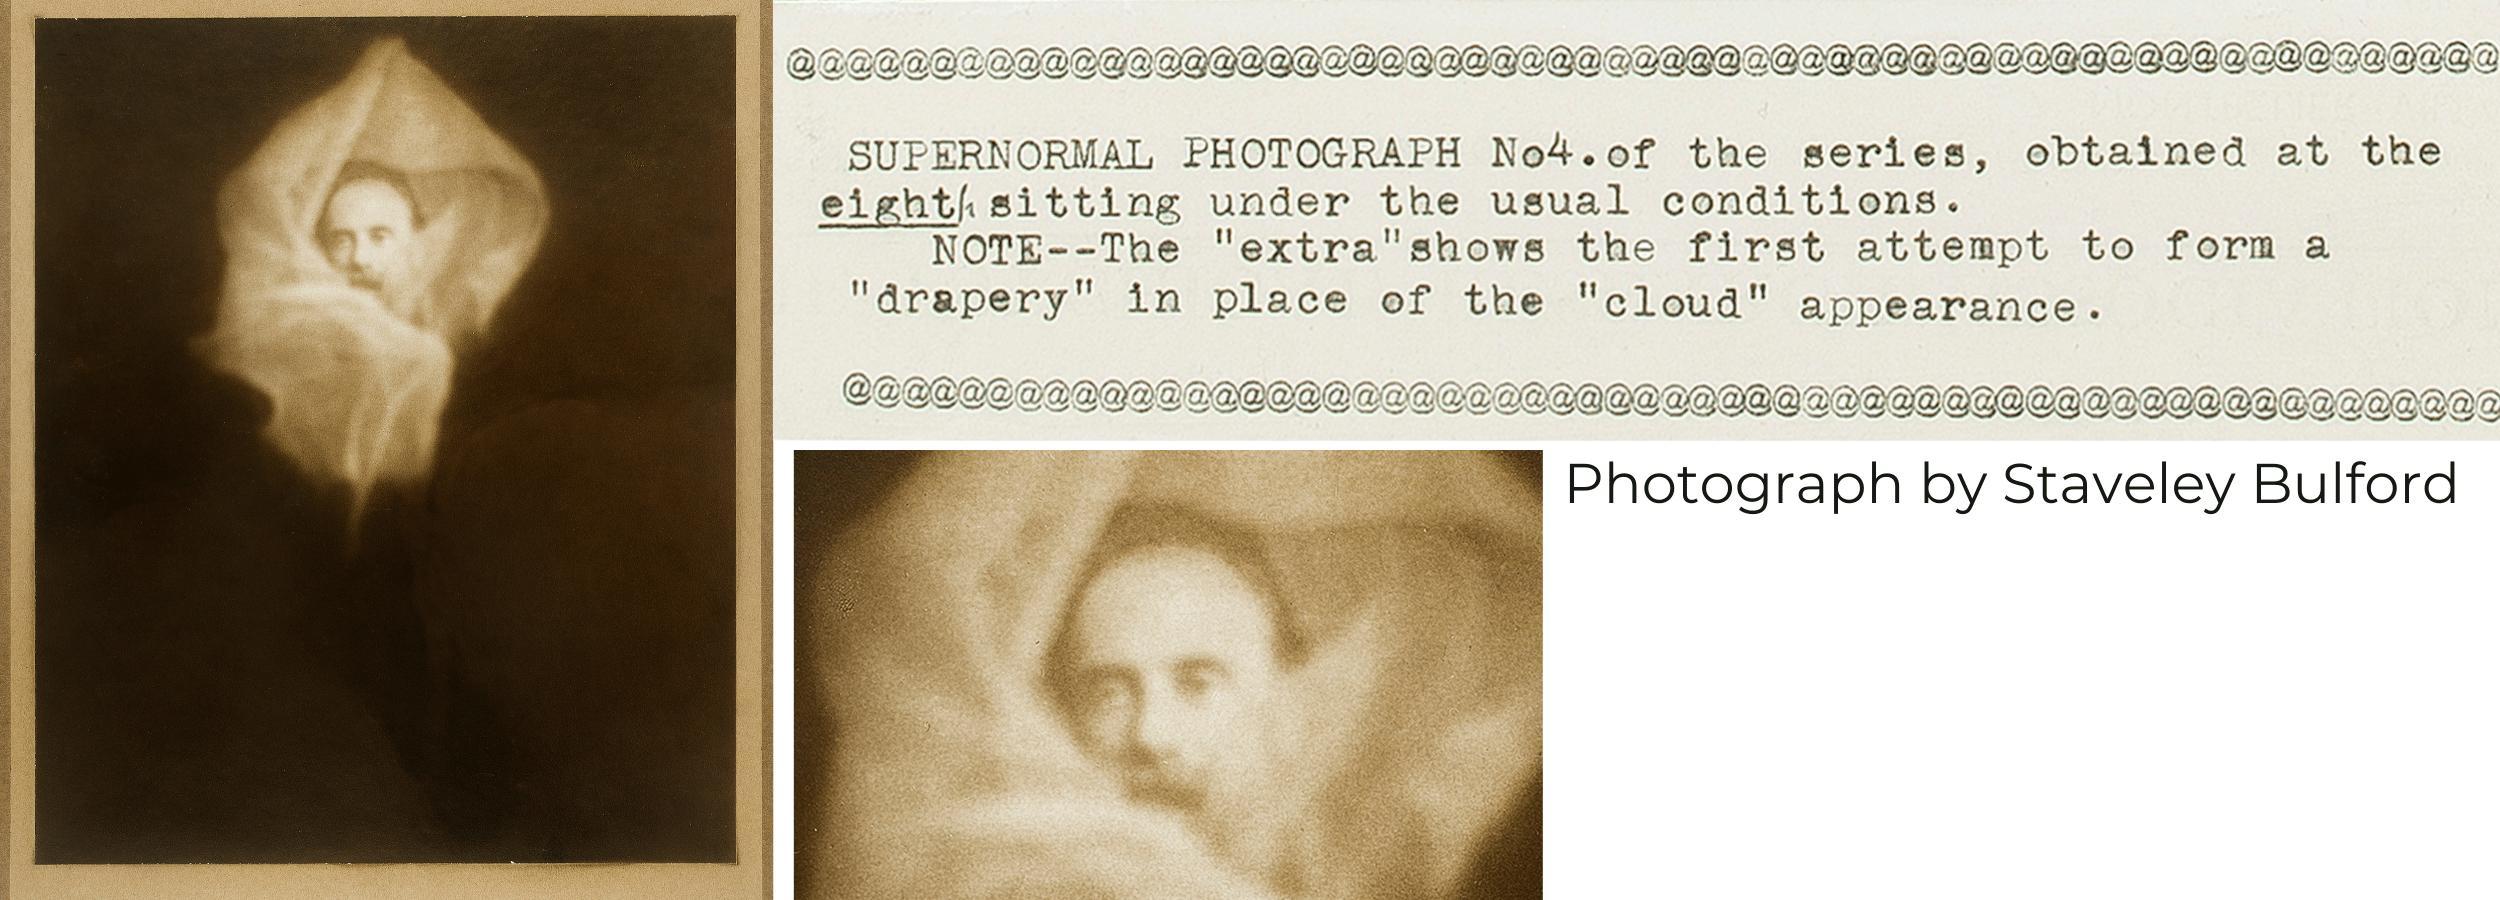 Photograph of ectoplasm by Staveley Bulford